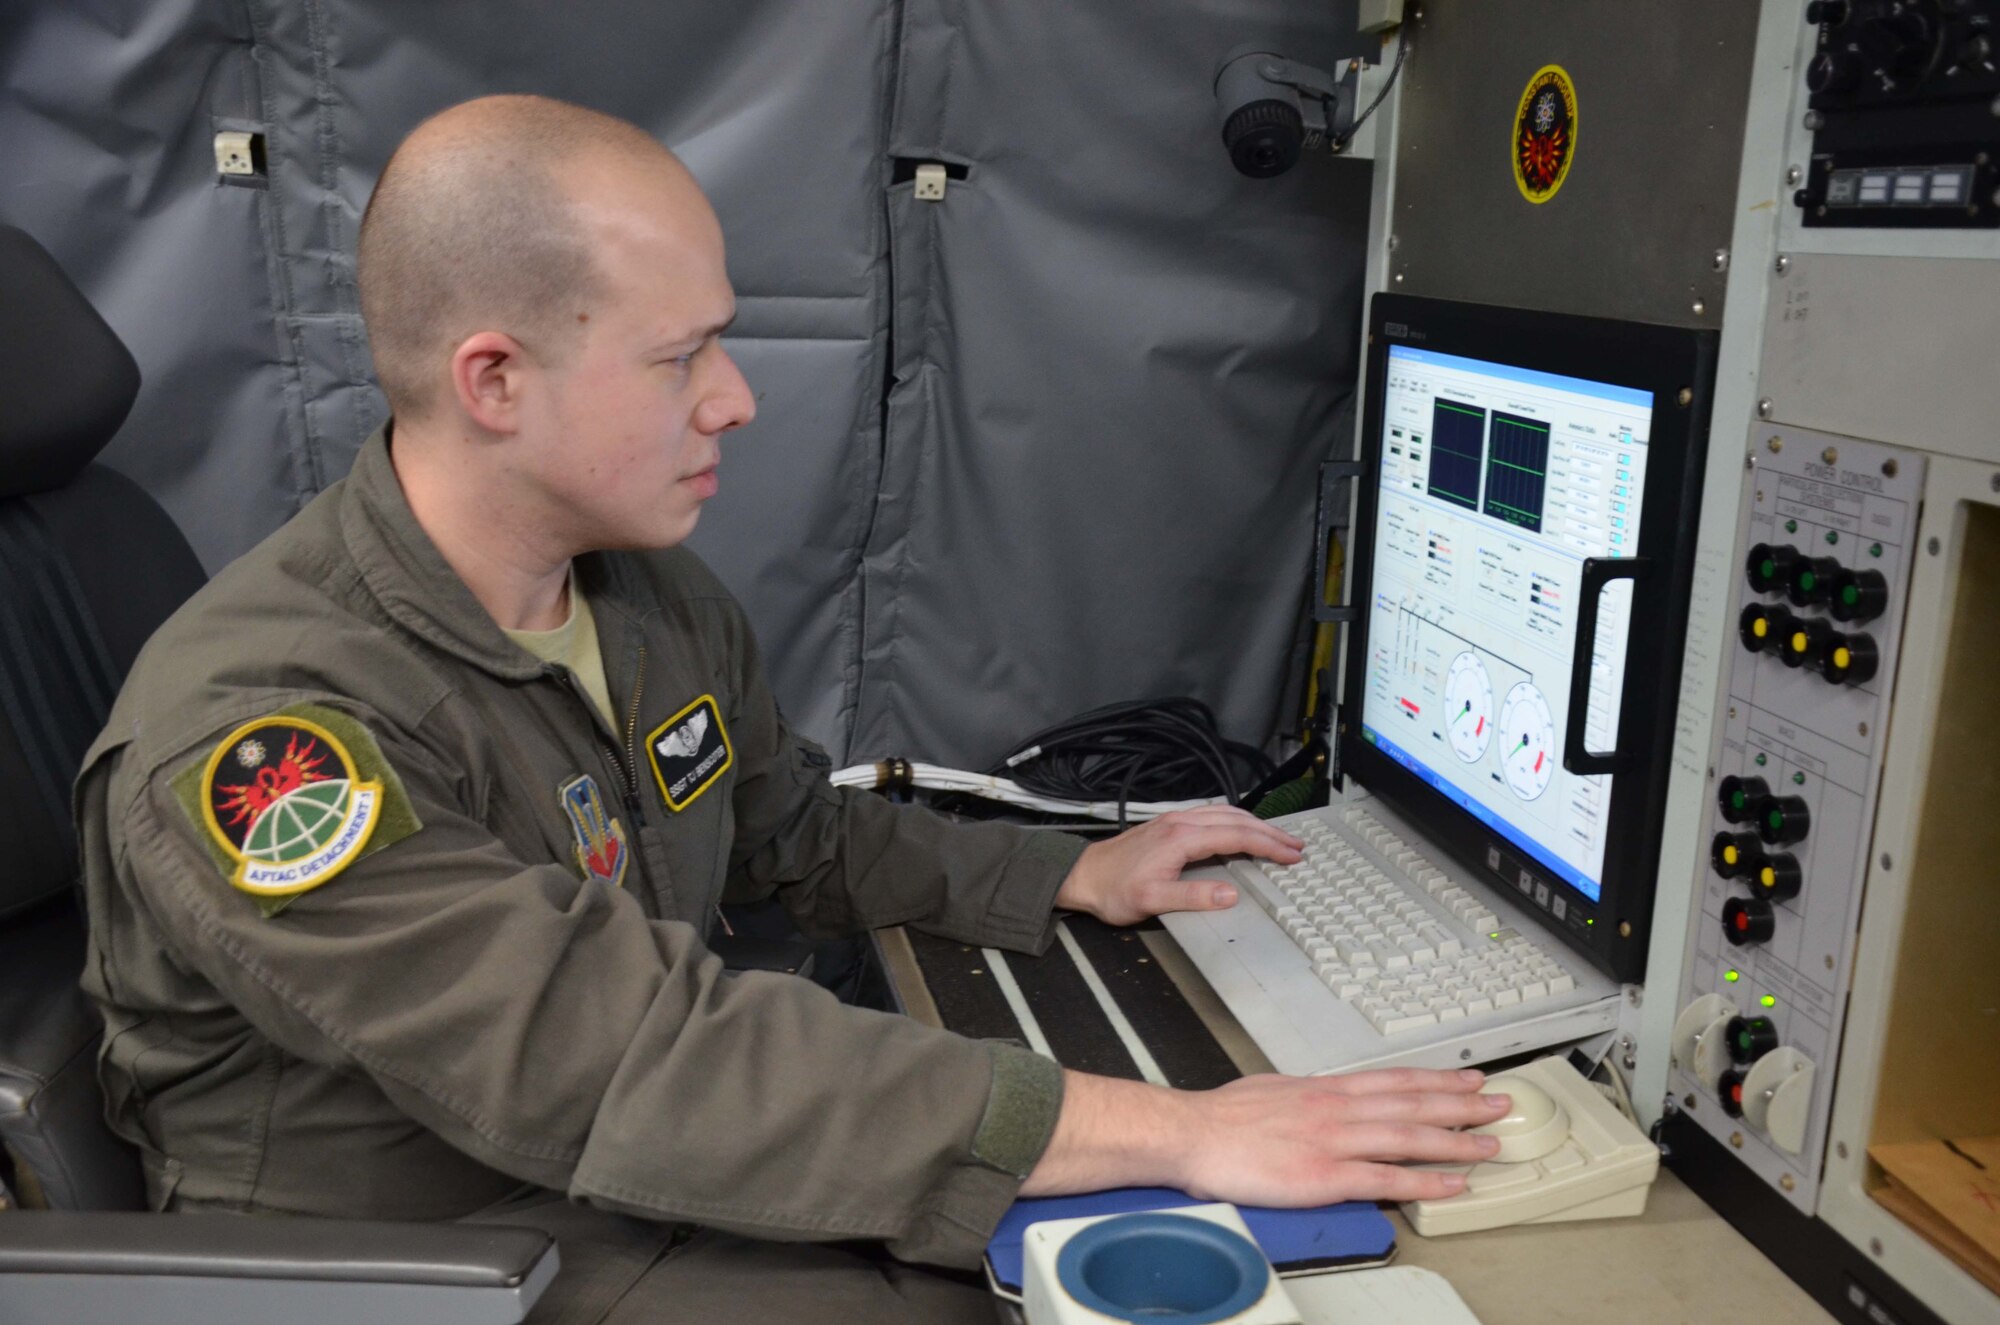 U.S. Air Force Staff Sgt. Theodore "TJ" Bencoter, a special equipment operator with the Air Force Technical Applications Center's Detachment 1 at Offutt AFB, Neb., reviews technical collection information aboard the WC-135 Constant Phoenix.  The aircraft was on display at Patrick AFB, Fla., for members of the nuclear treaty monitoring center and base personnel to tour.   (U.S. Air Force photo by Susan A. Romano)